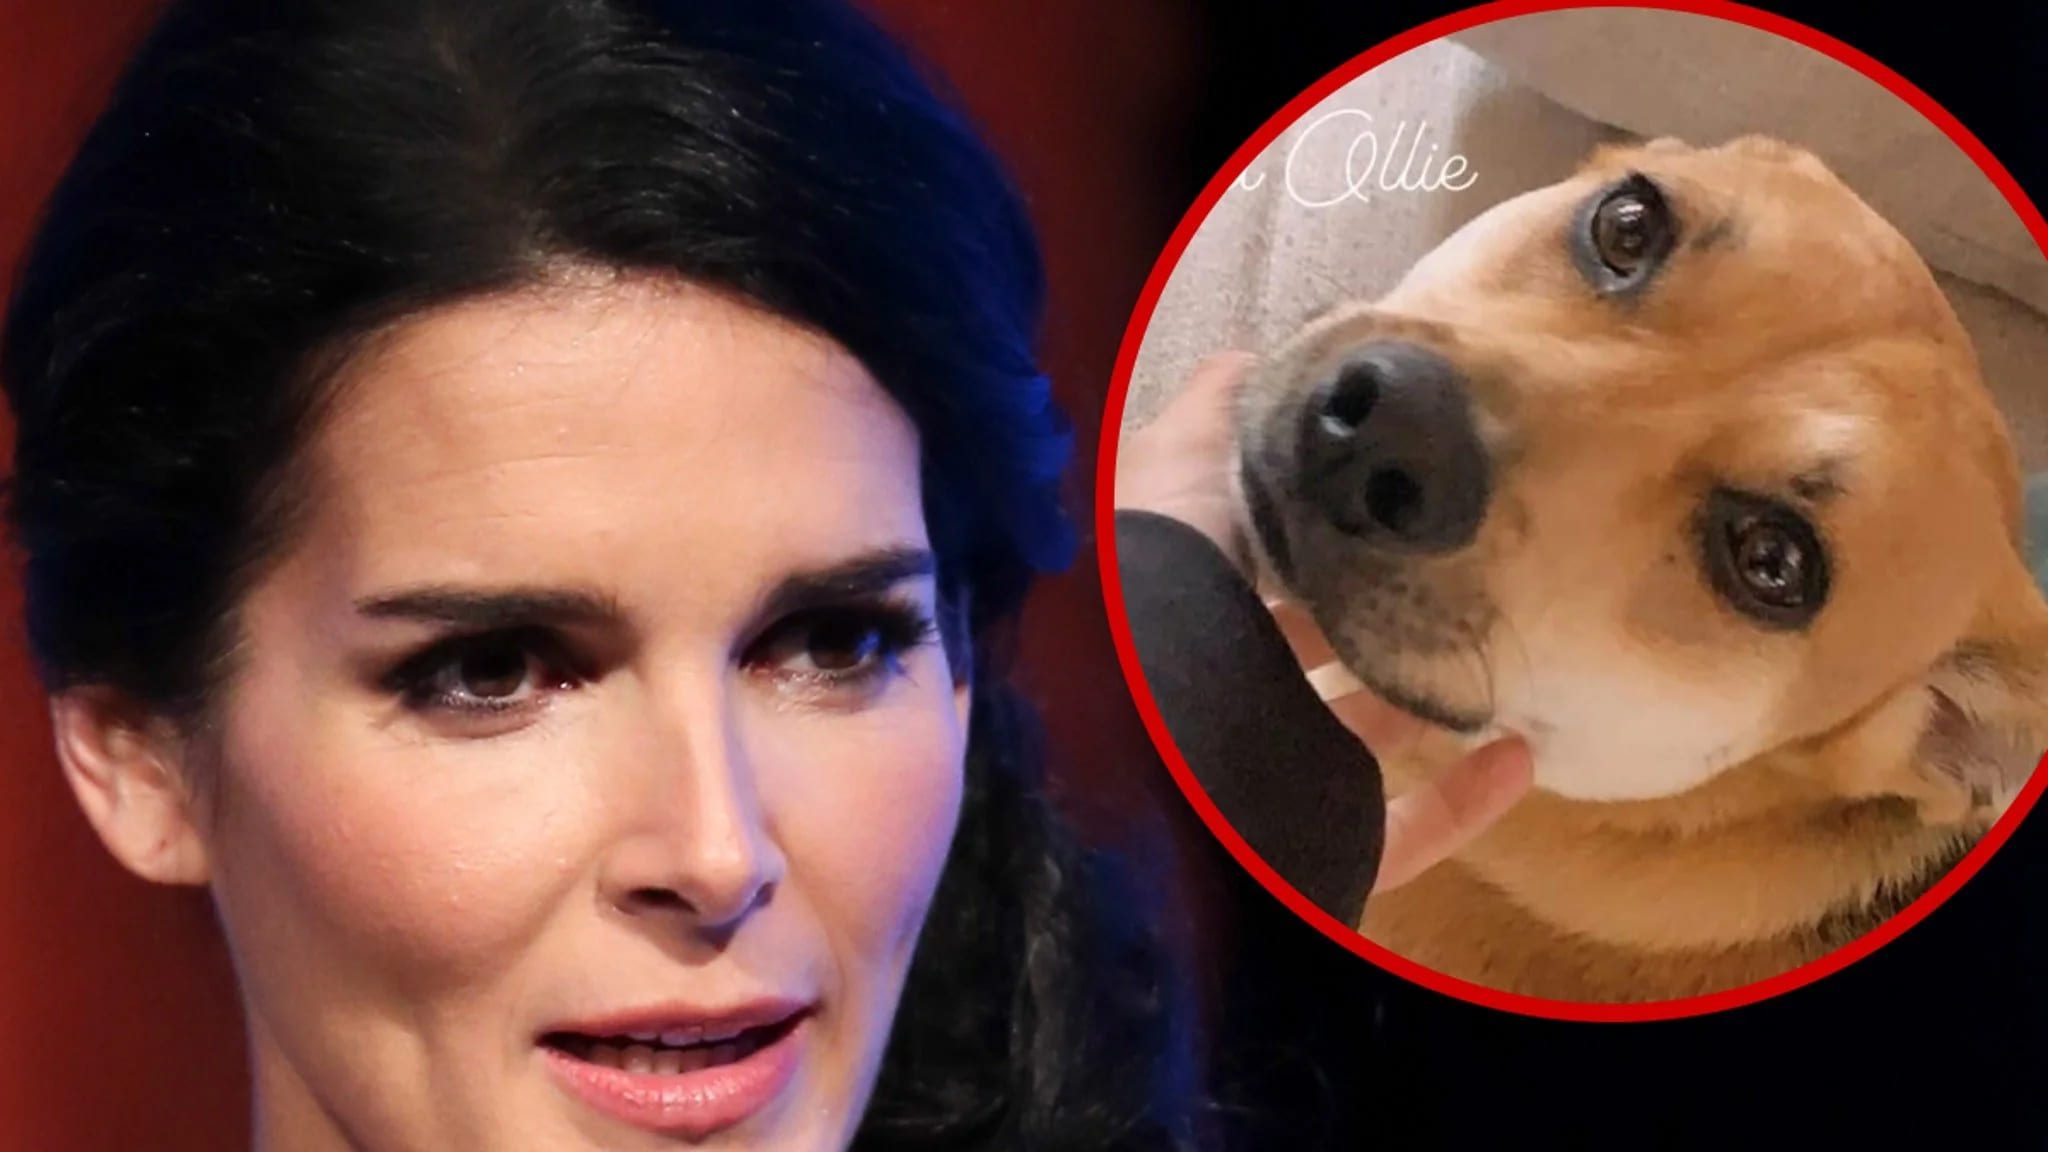 An Instacart delivery van driver killed Angie Harmon's dog